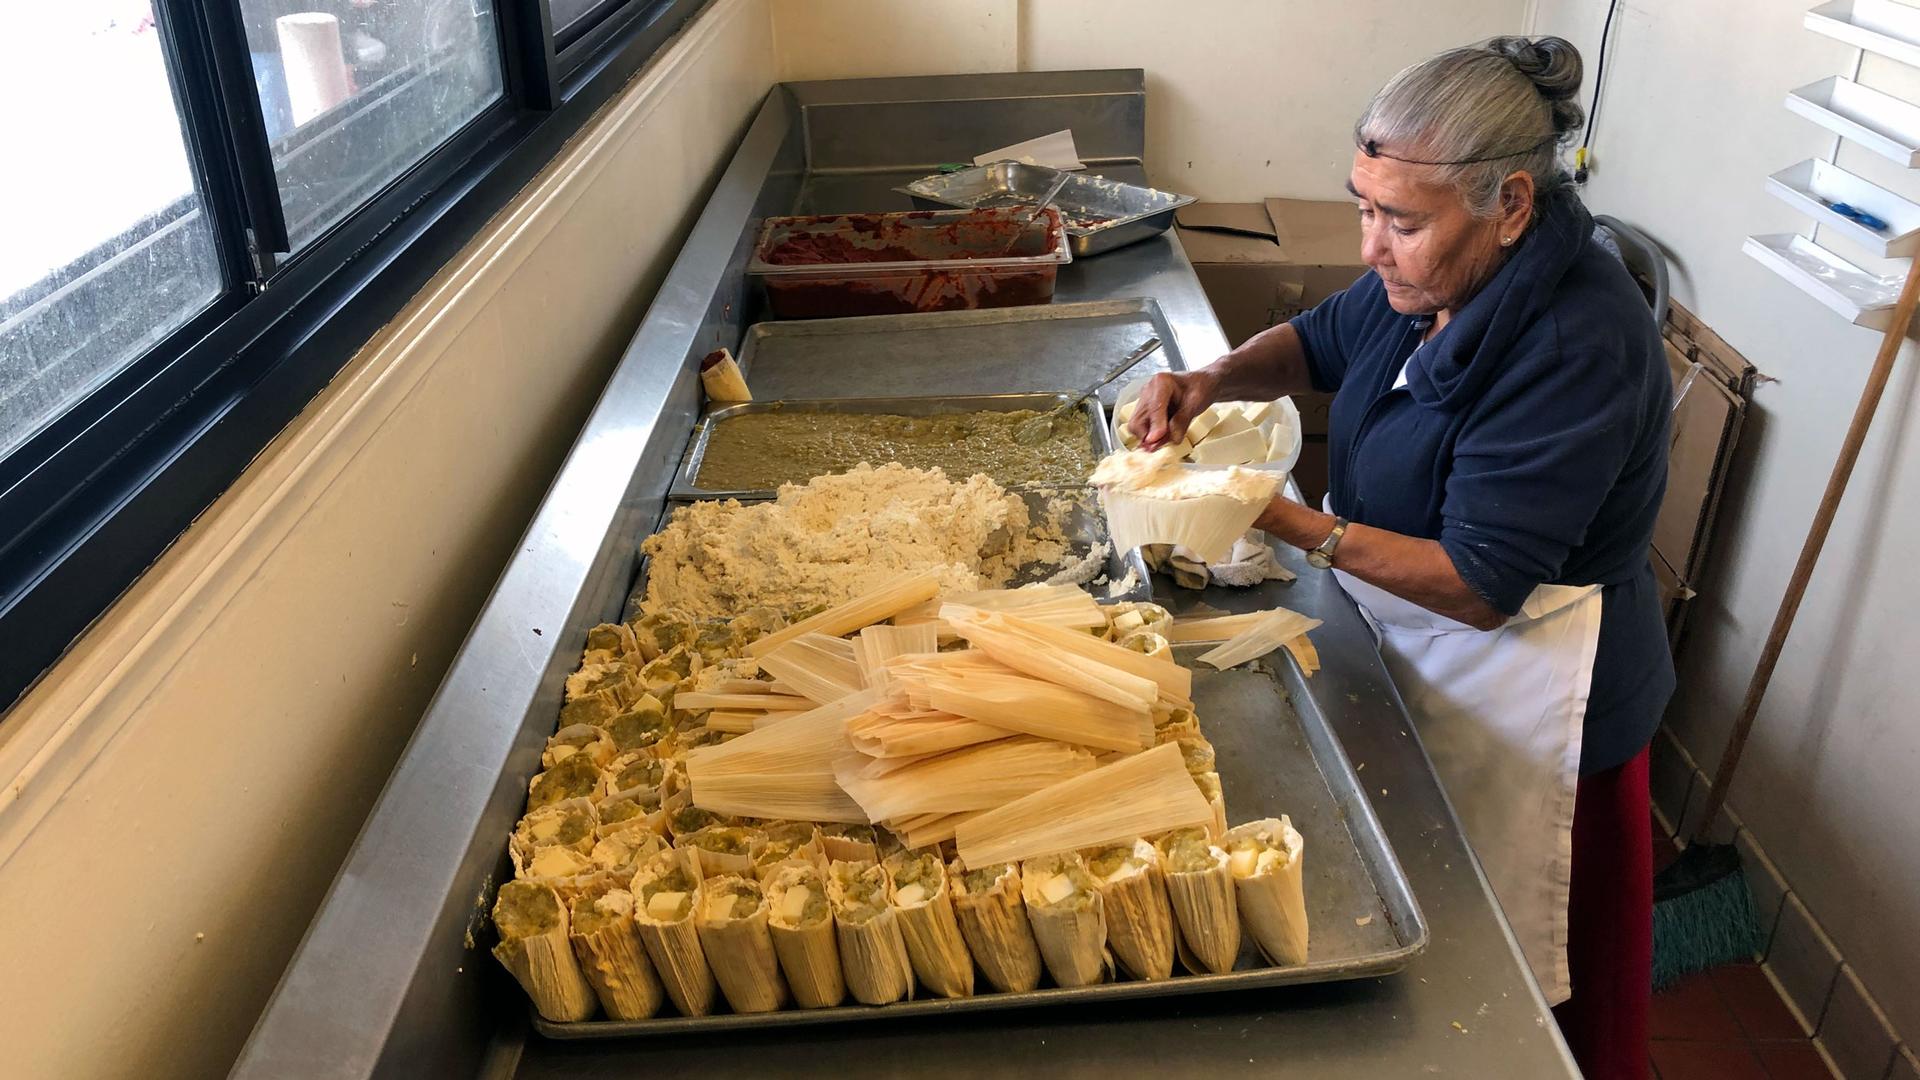 A woman stands a at a table assembling tamales